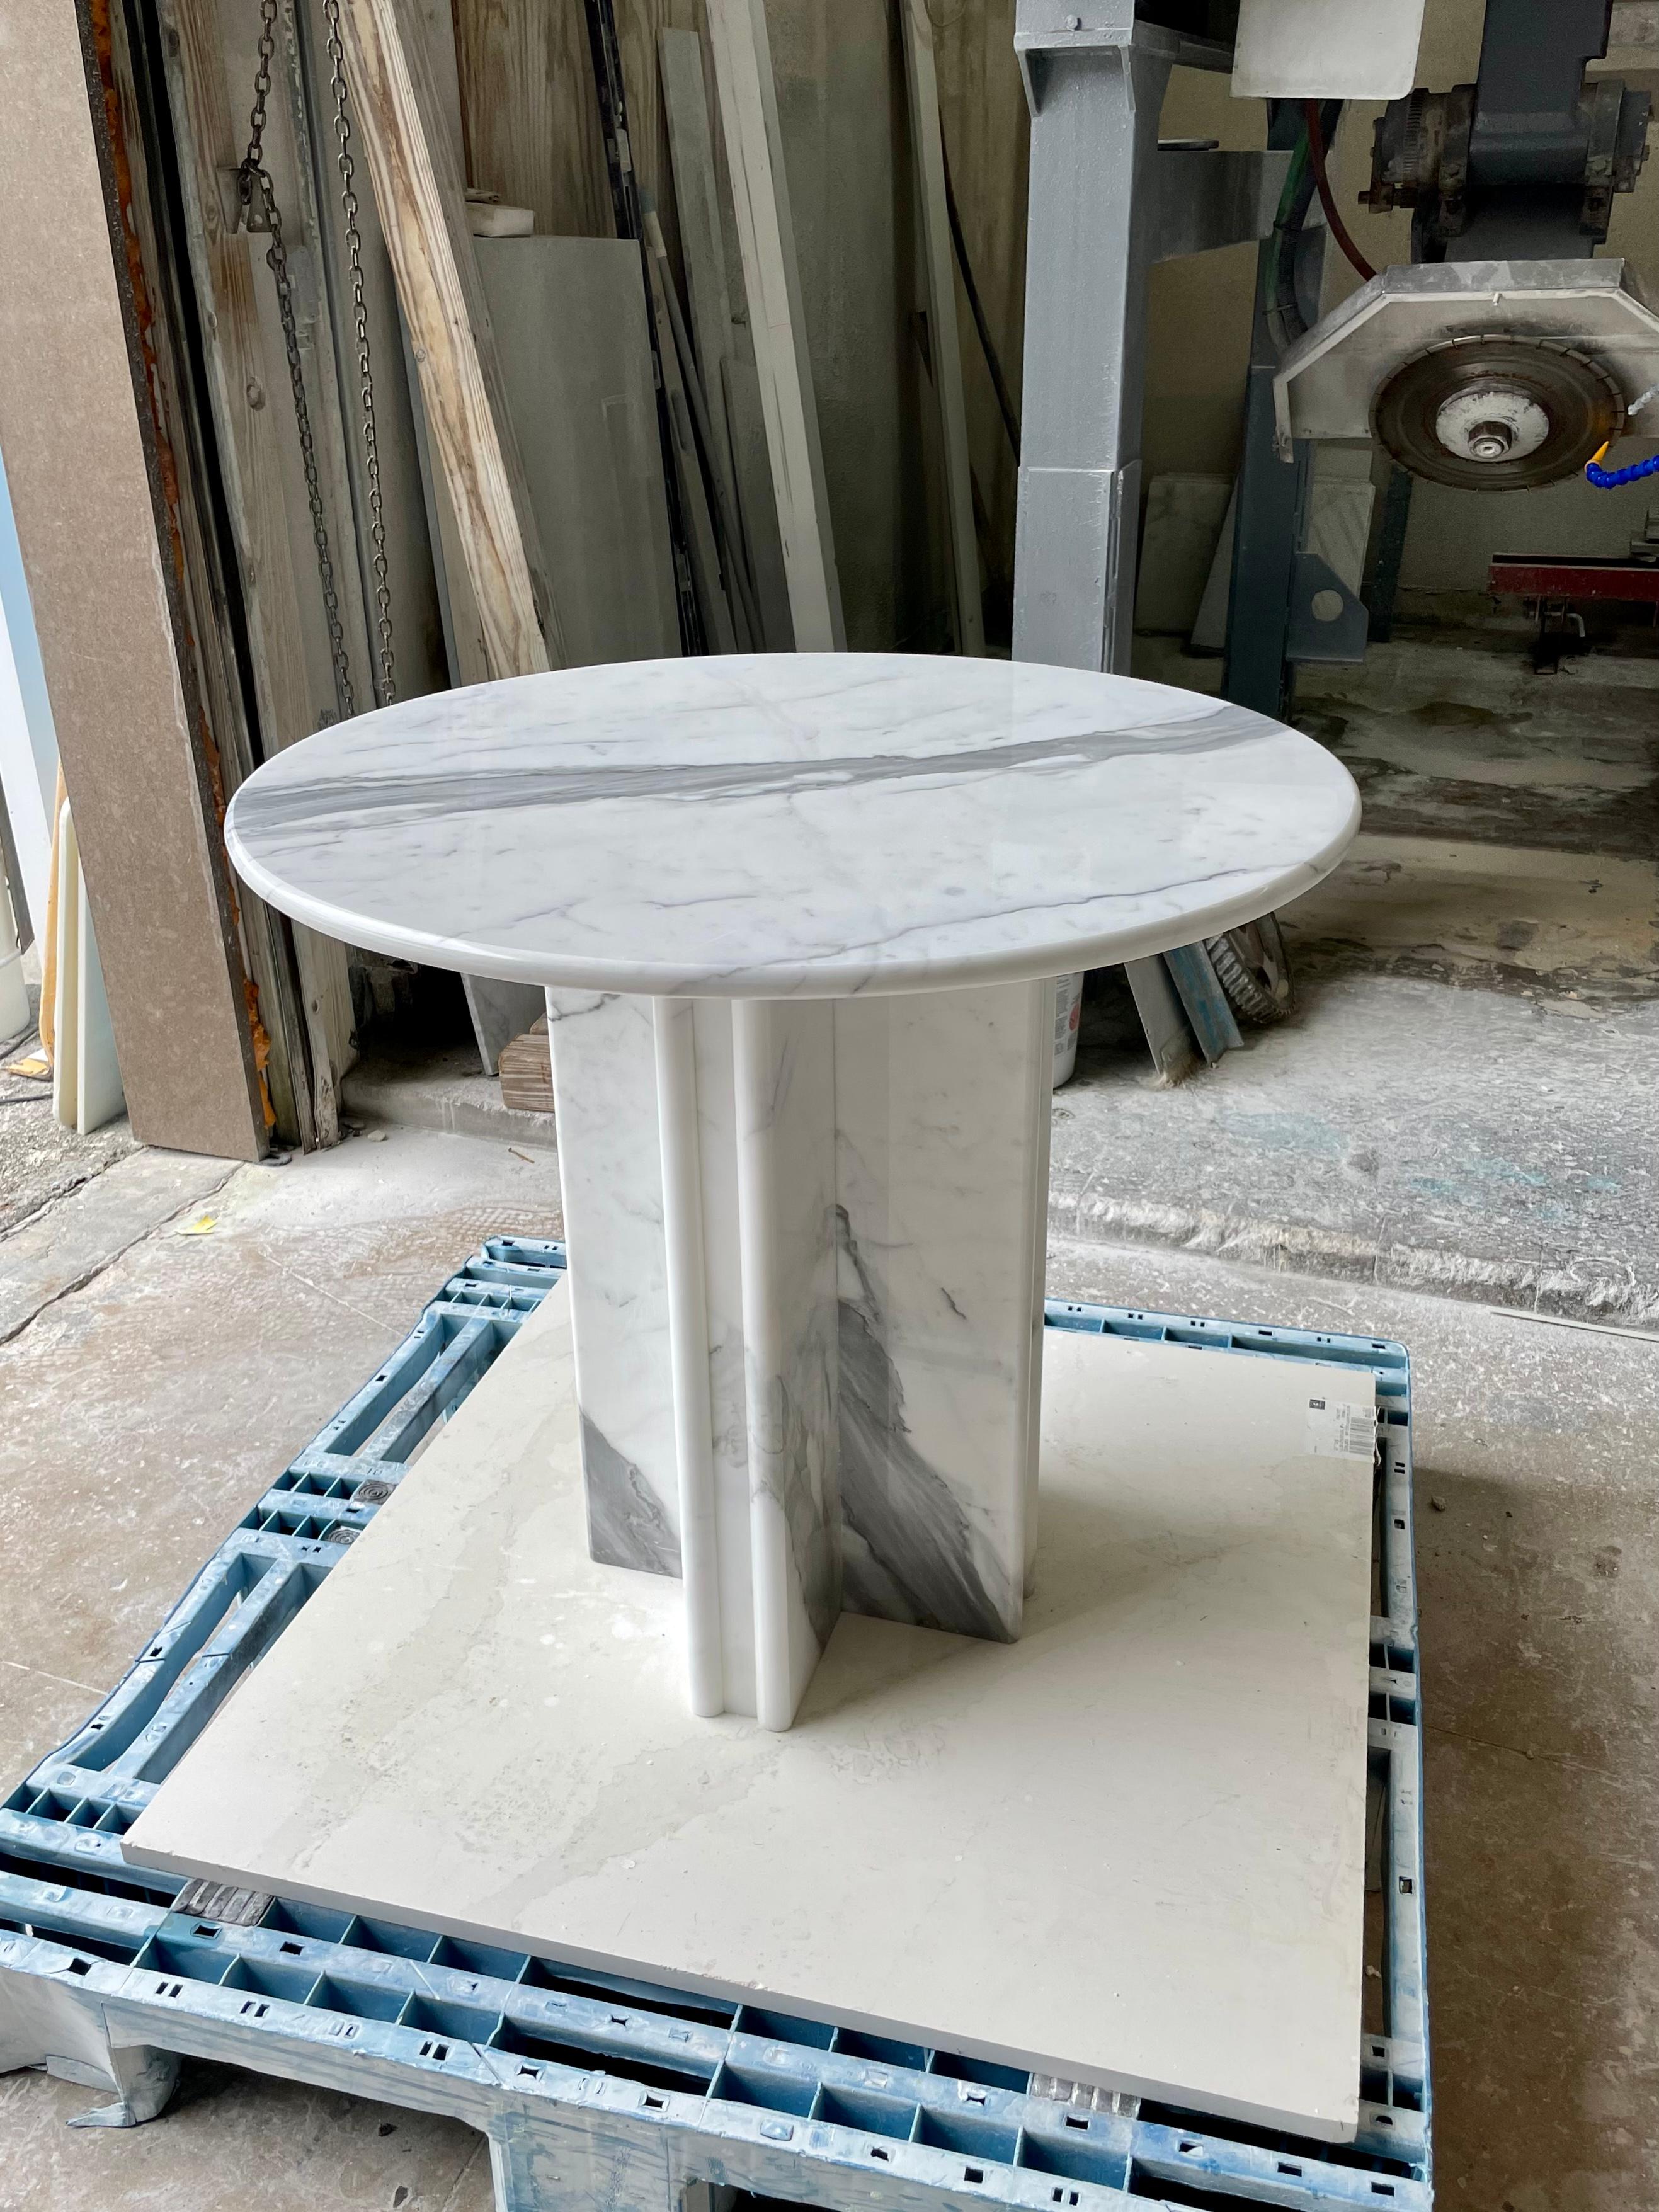 Built and ready to ship! Our custom Italian Carrara marble center / breakfast / game table of three centimeters thick Italian Carrara marble fabricated in an early 20th century Modernist architecture.

We hand fabricate and polish or hone each of